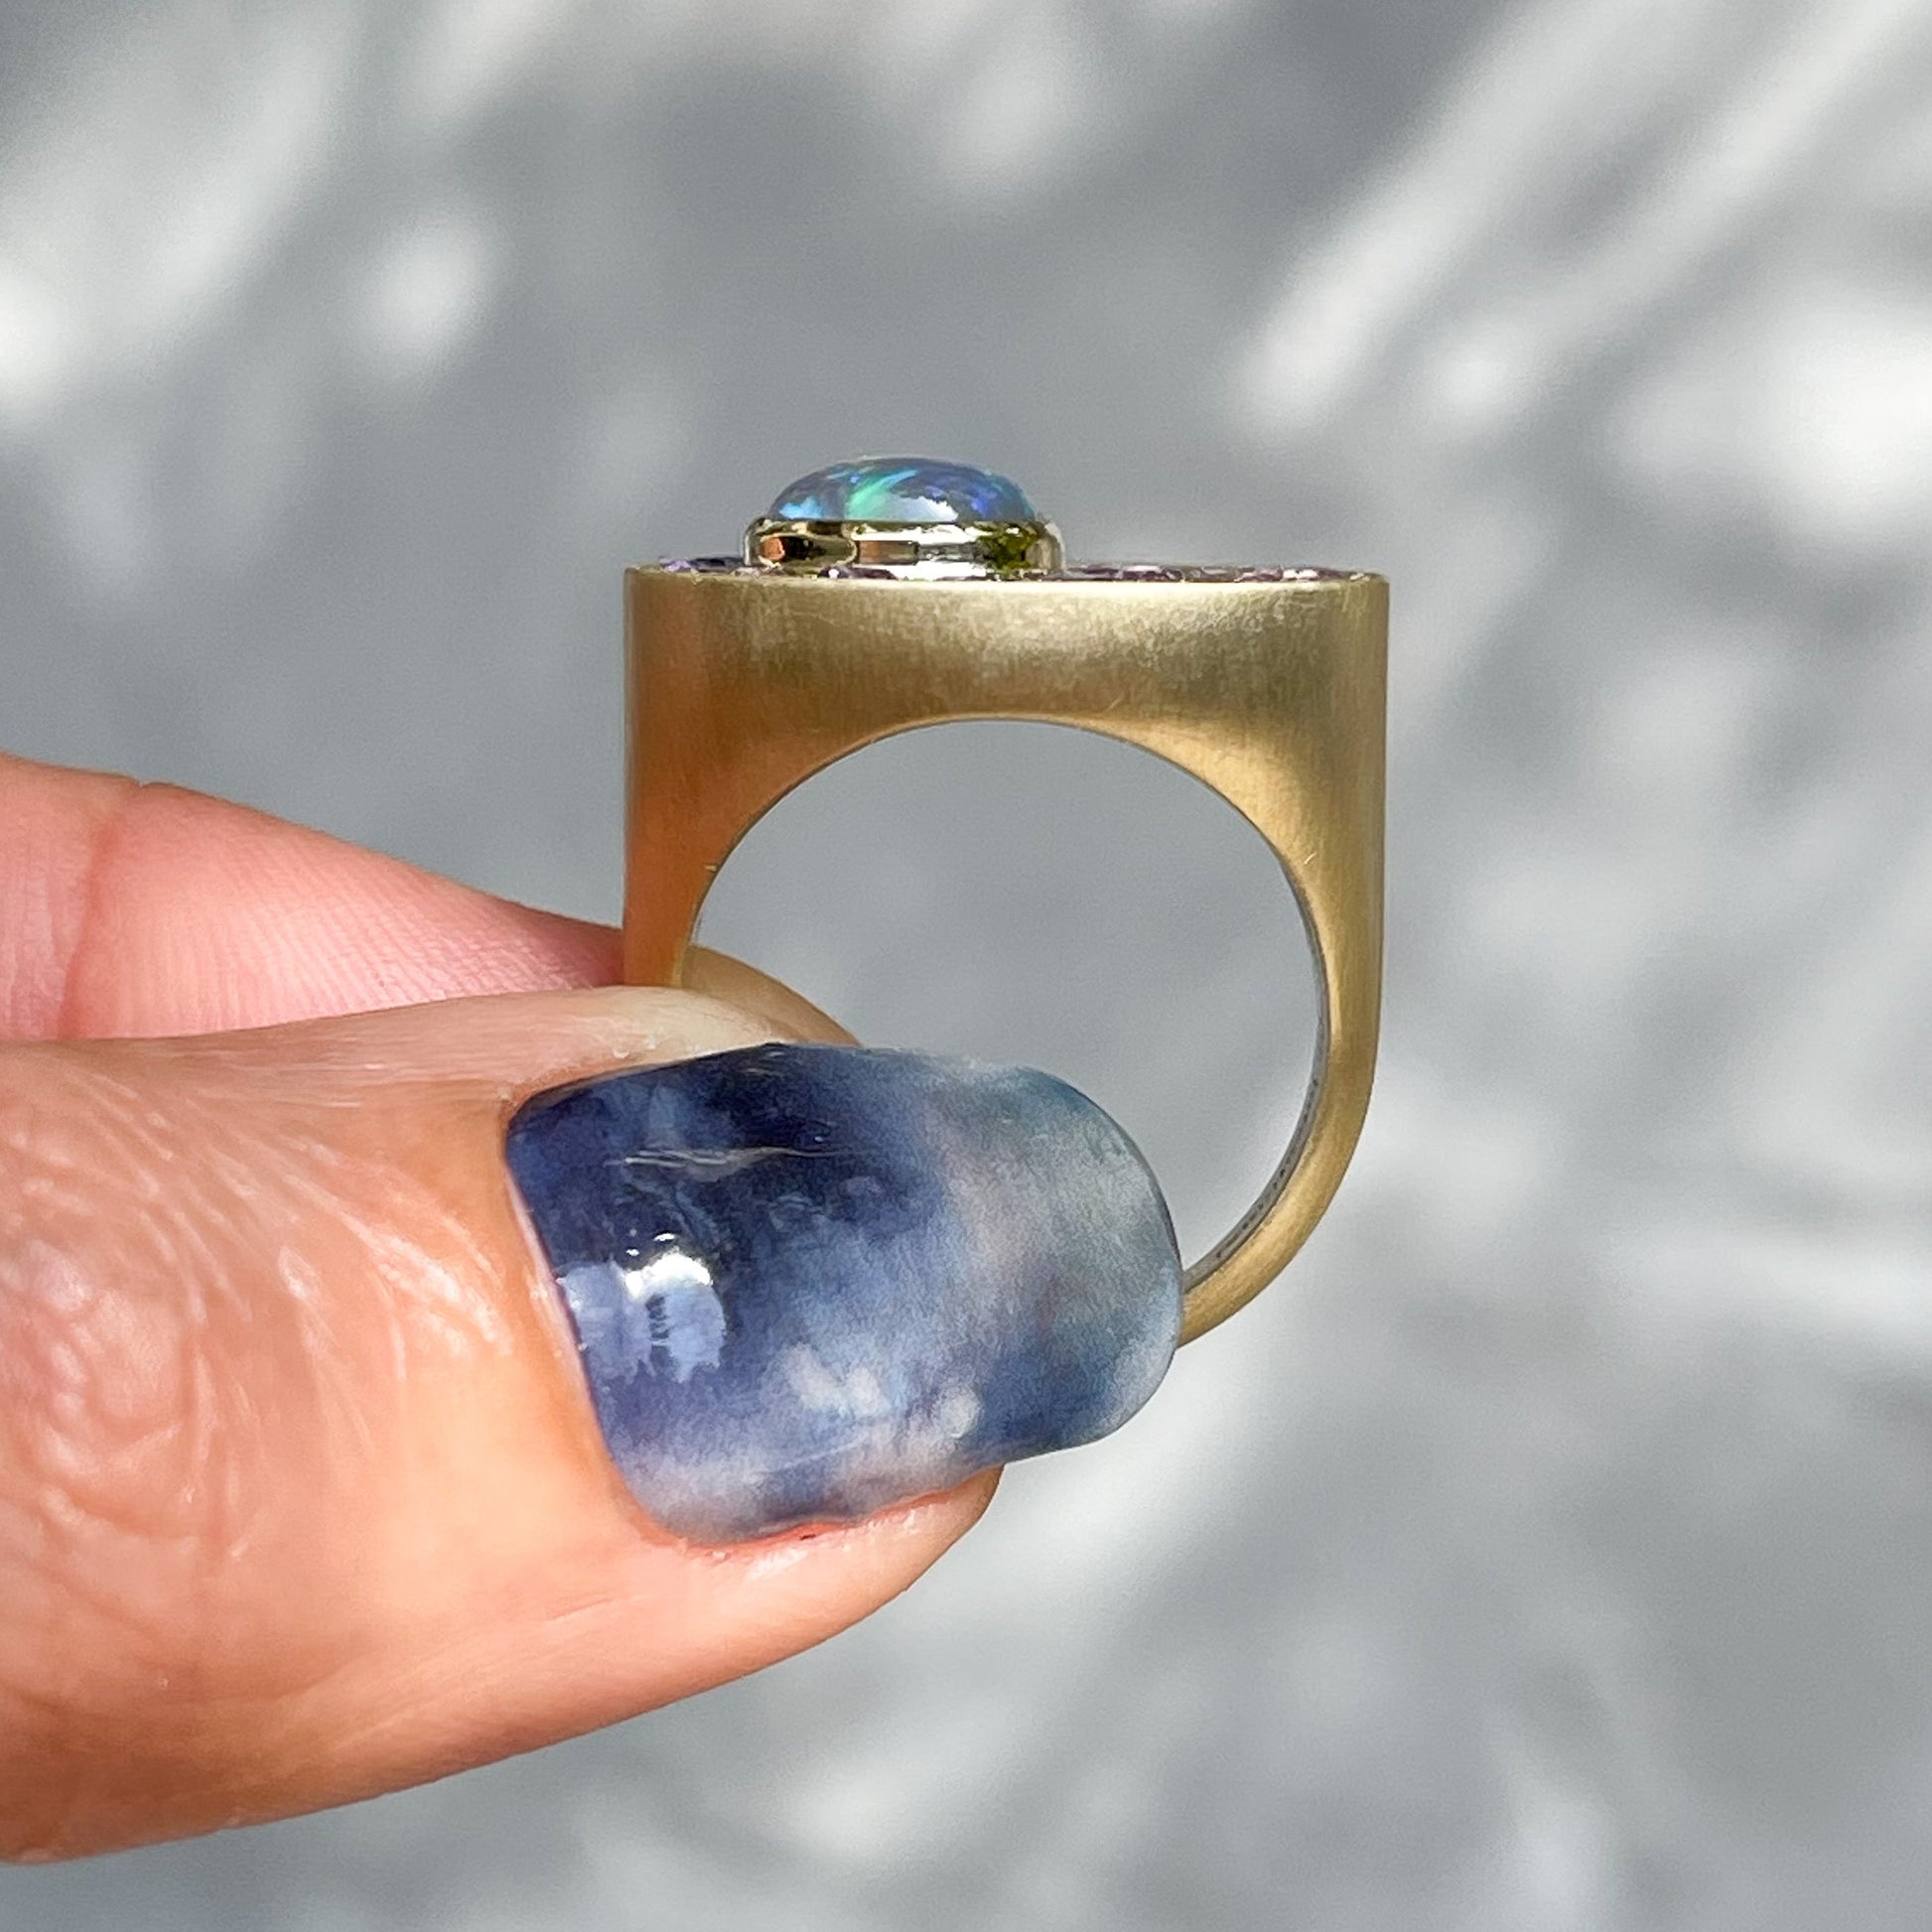 An Australian Opal Ring by NIXIN Jewelry held to show its side view. A modern opal ring designed as opal art.